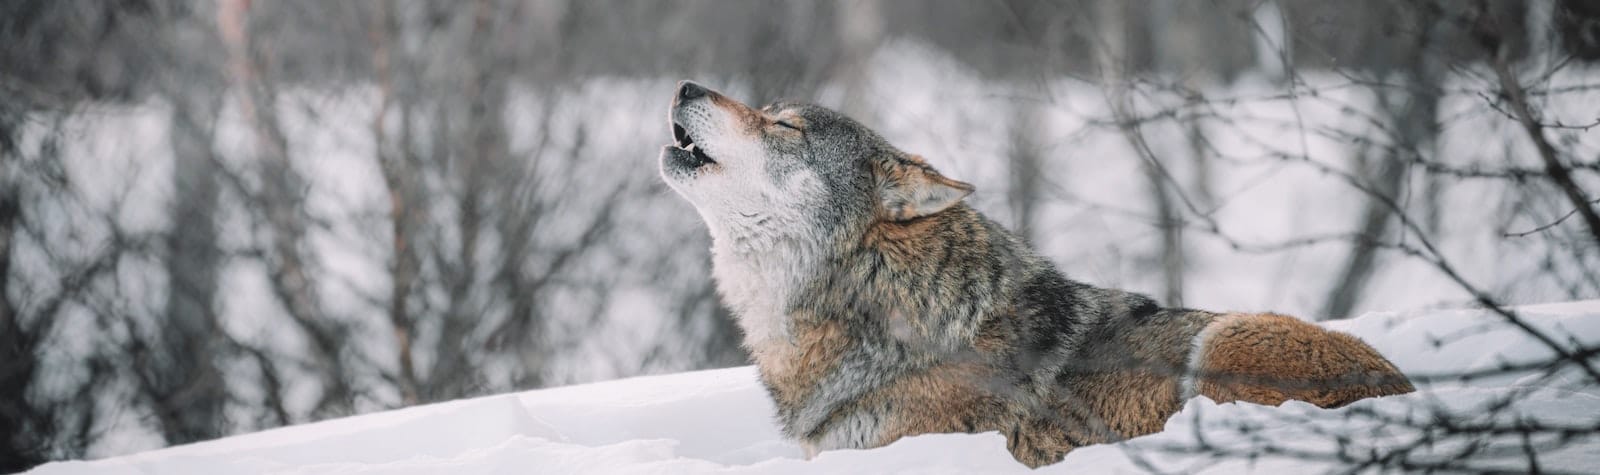 Take Action: Comment on Colorado’s Wolf Management Plan